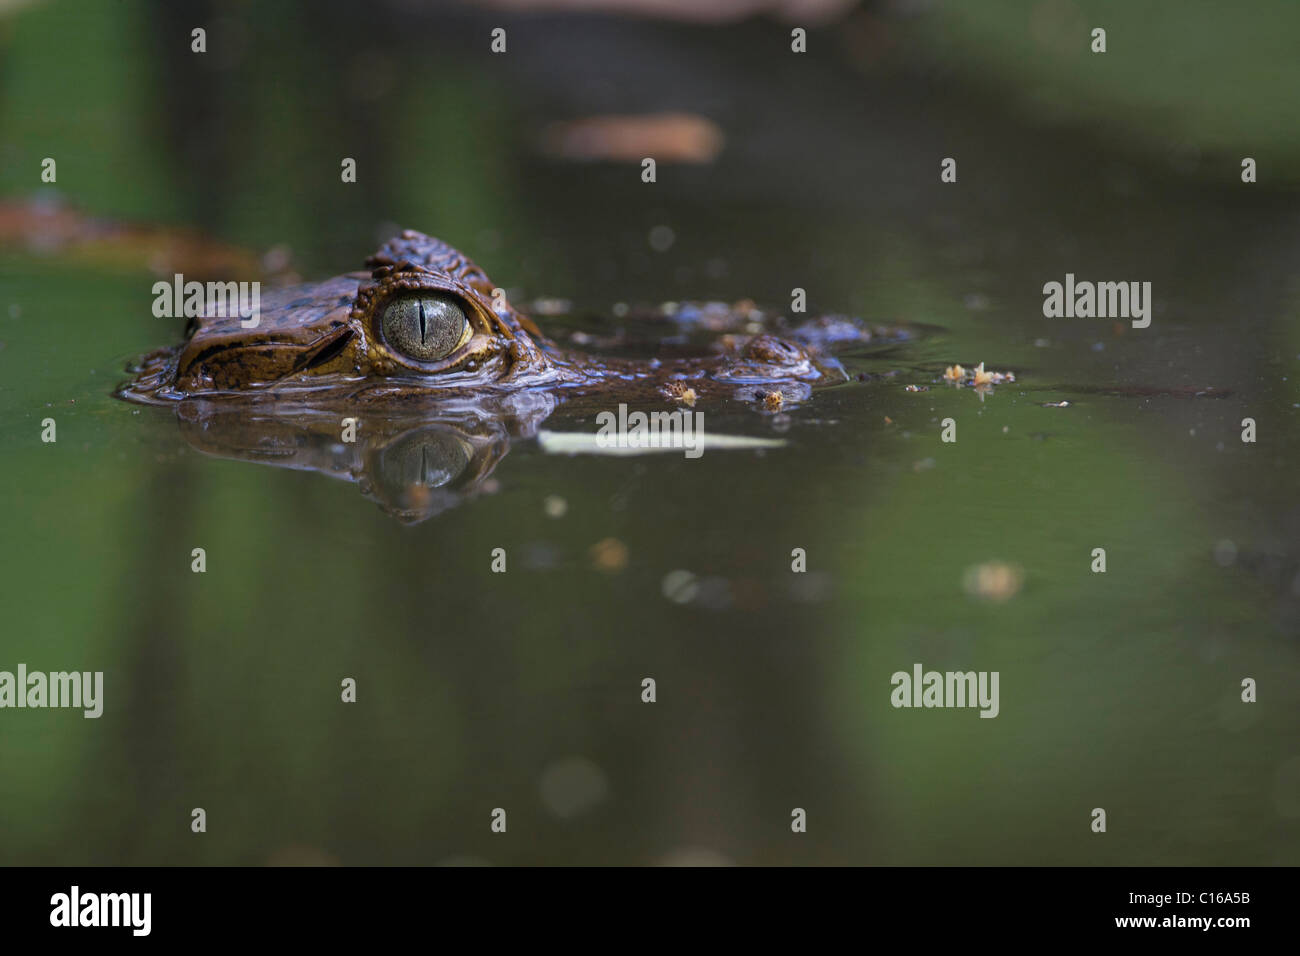 Baby Spectacled Caiman (Caiman crocodilus) on a pond, primary forest, Costa Rica, Osa Peninsula Stock Photo